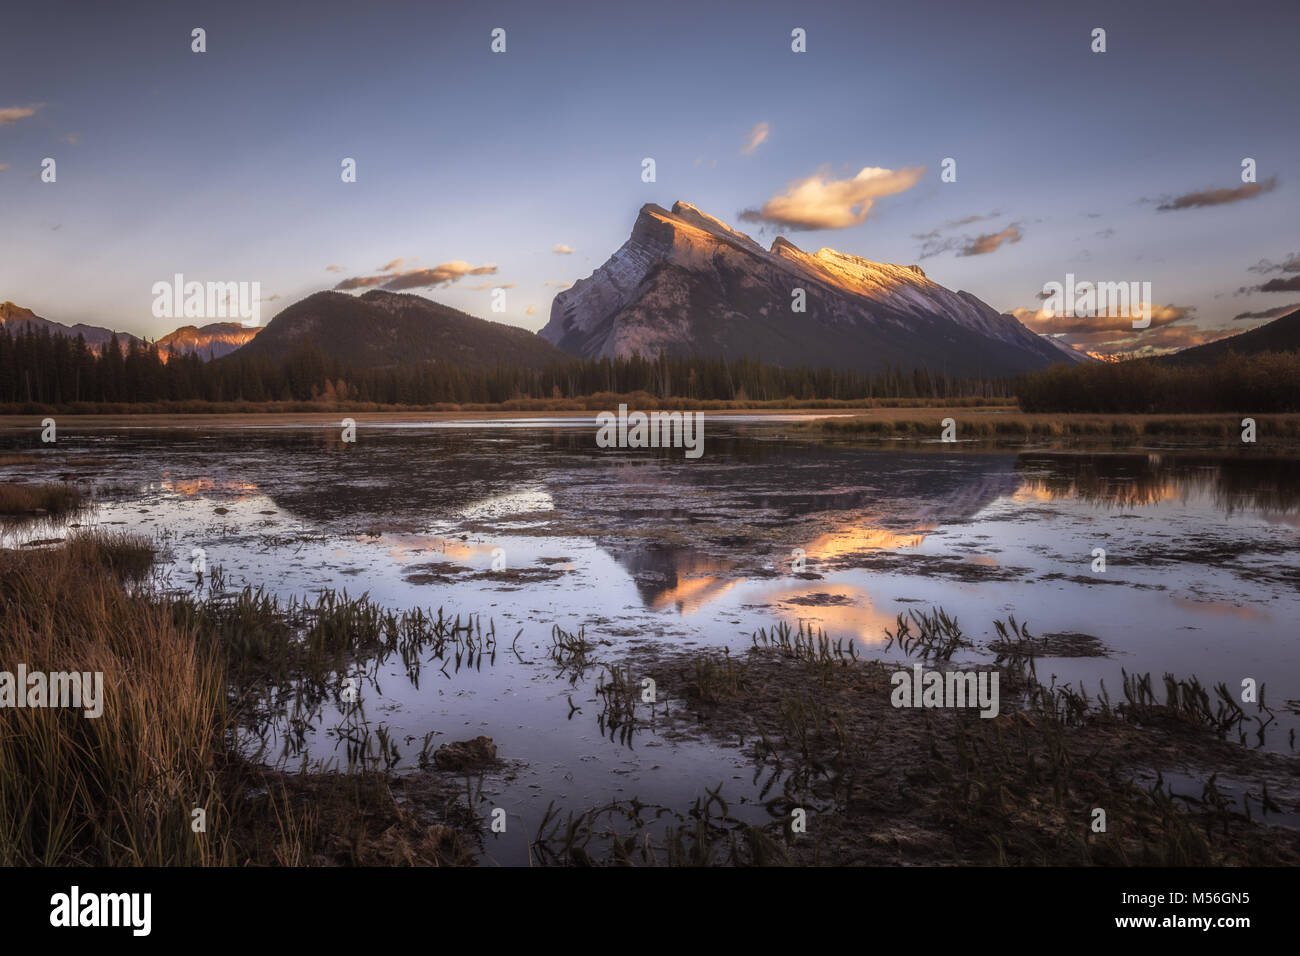 Mount Rundle at sunset in Banff National Park Stock Photo